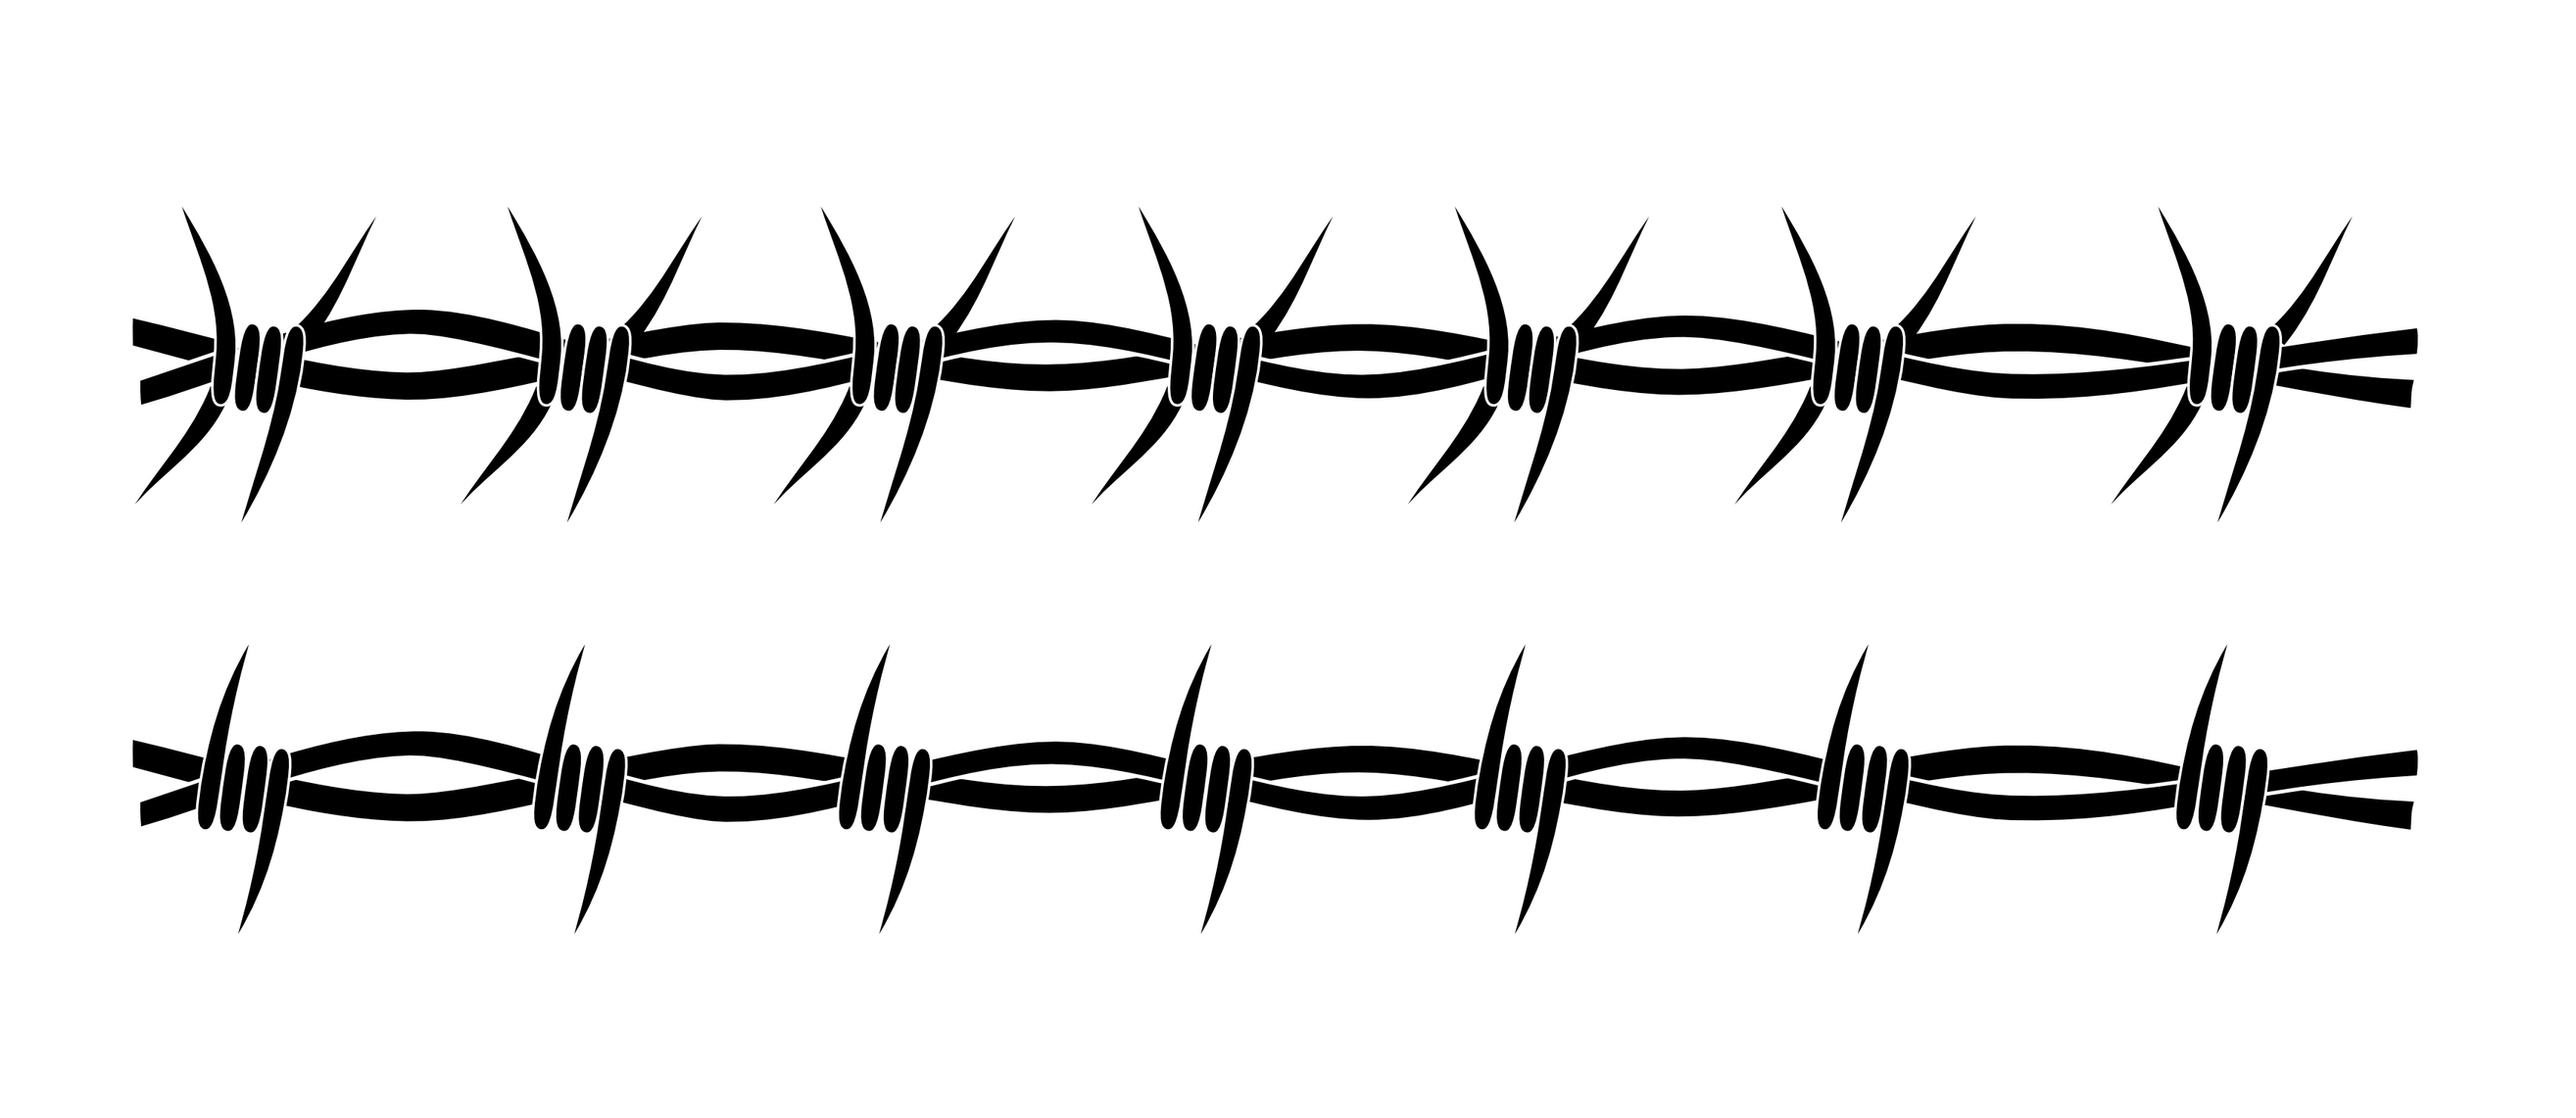 barb wire drawing